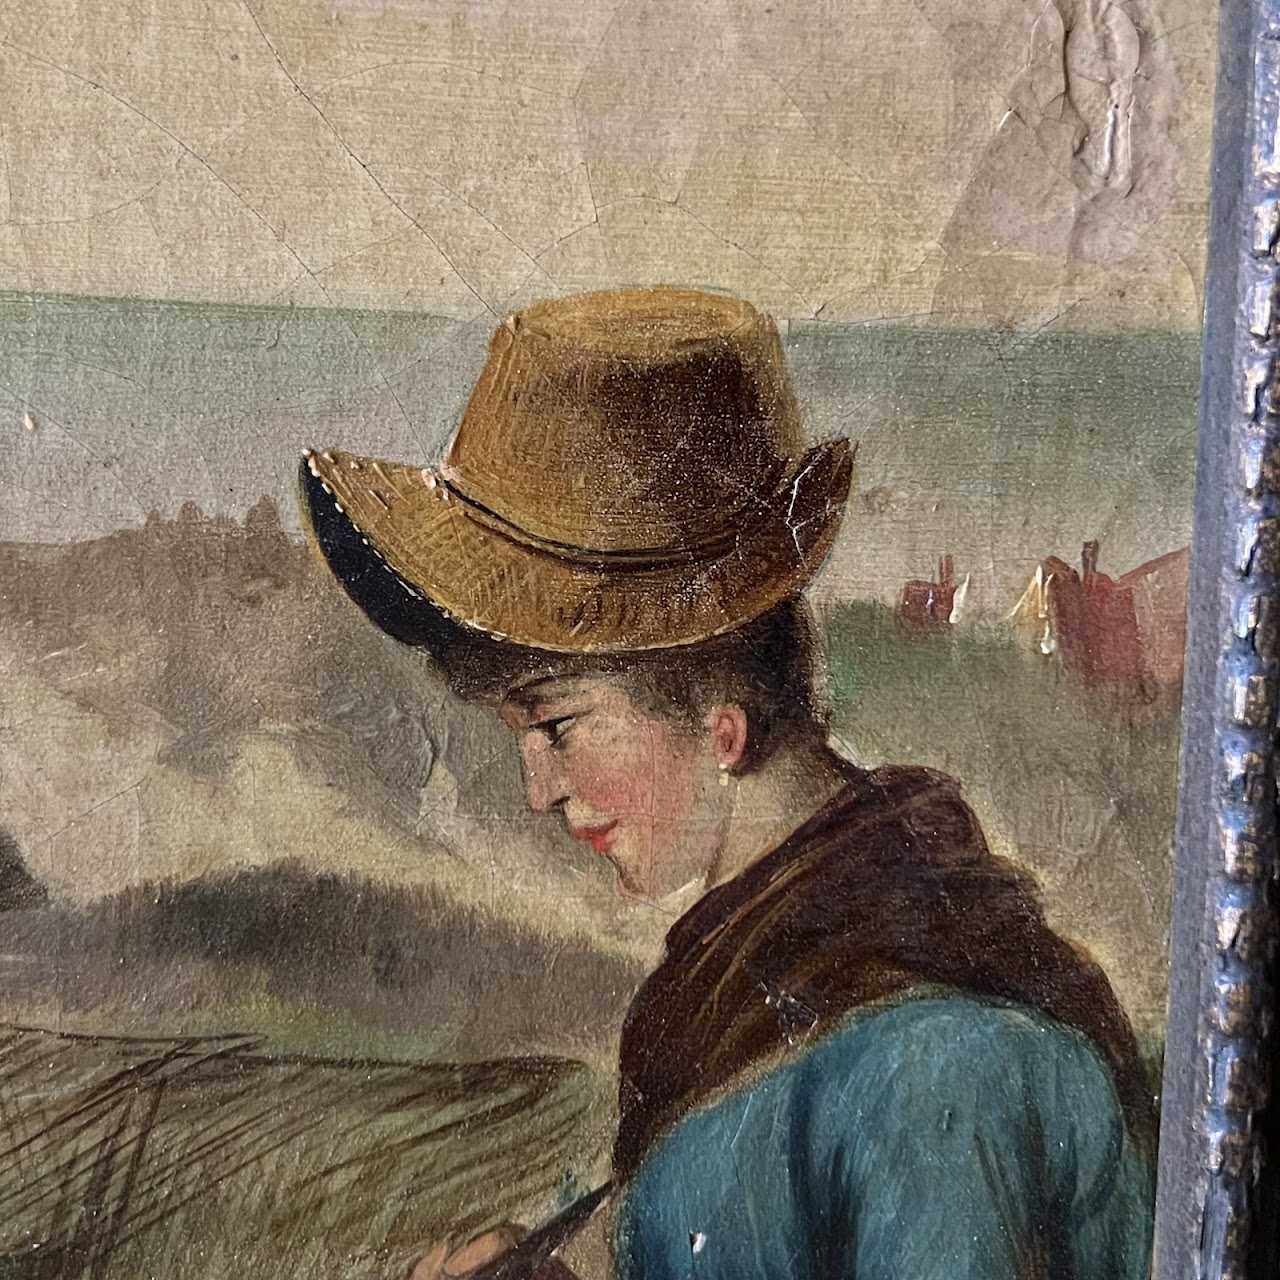 R. Gould Signed Antique Seaside Scene Oil Painting